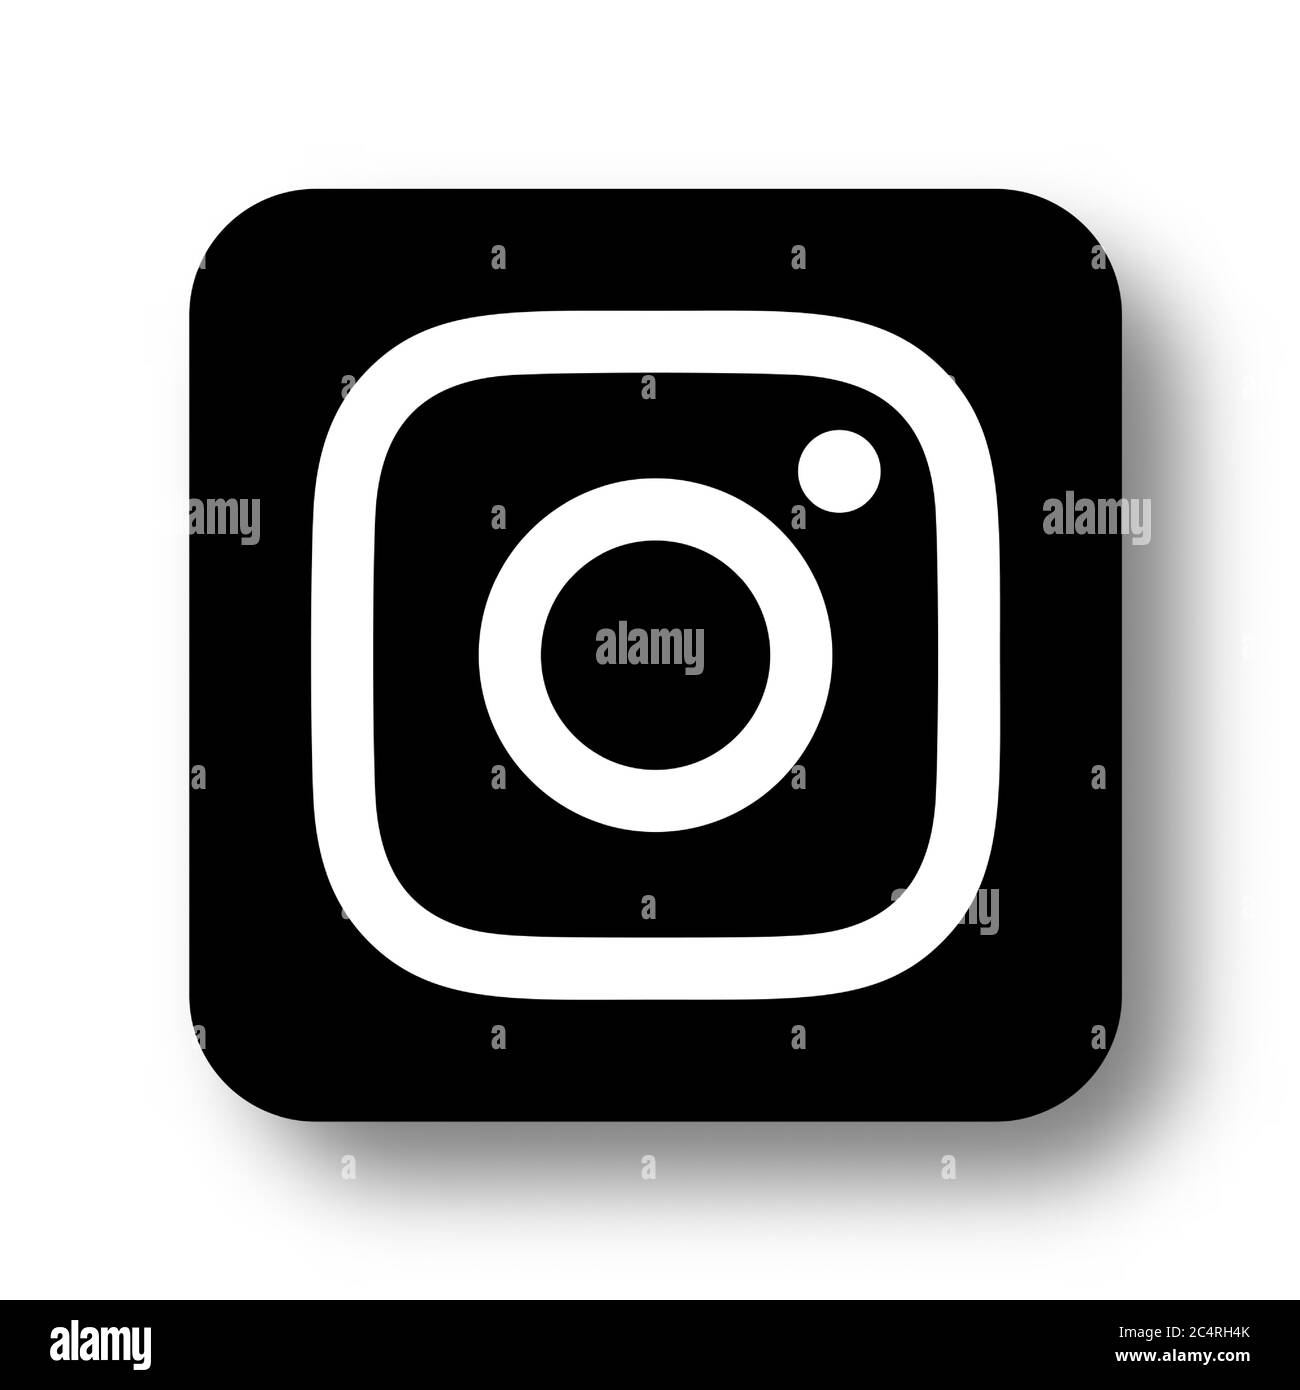 VORONEZH, RUSSIA - JANUARY 31, 2020: Instagram logo black square icon with soft shadow Stock Vector